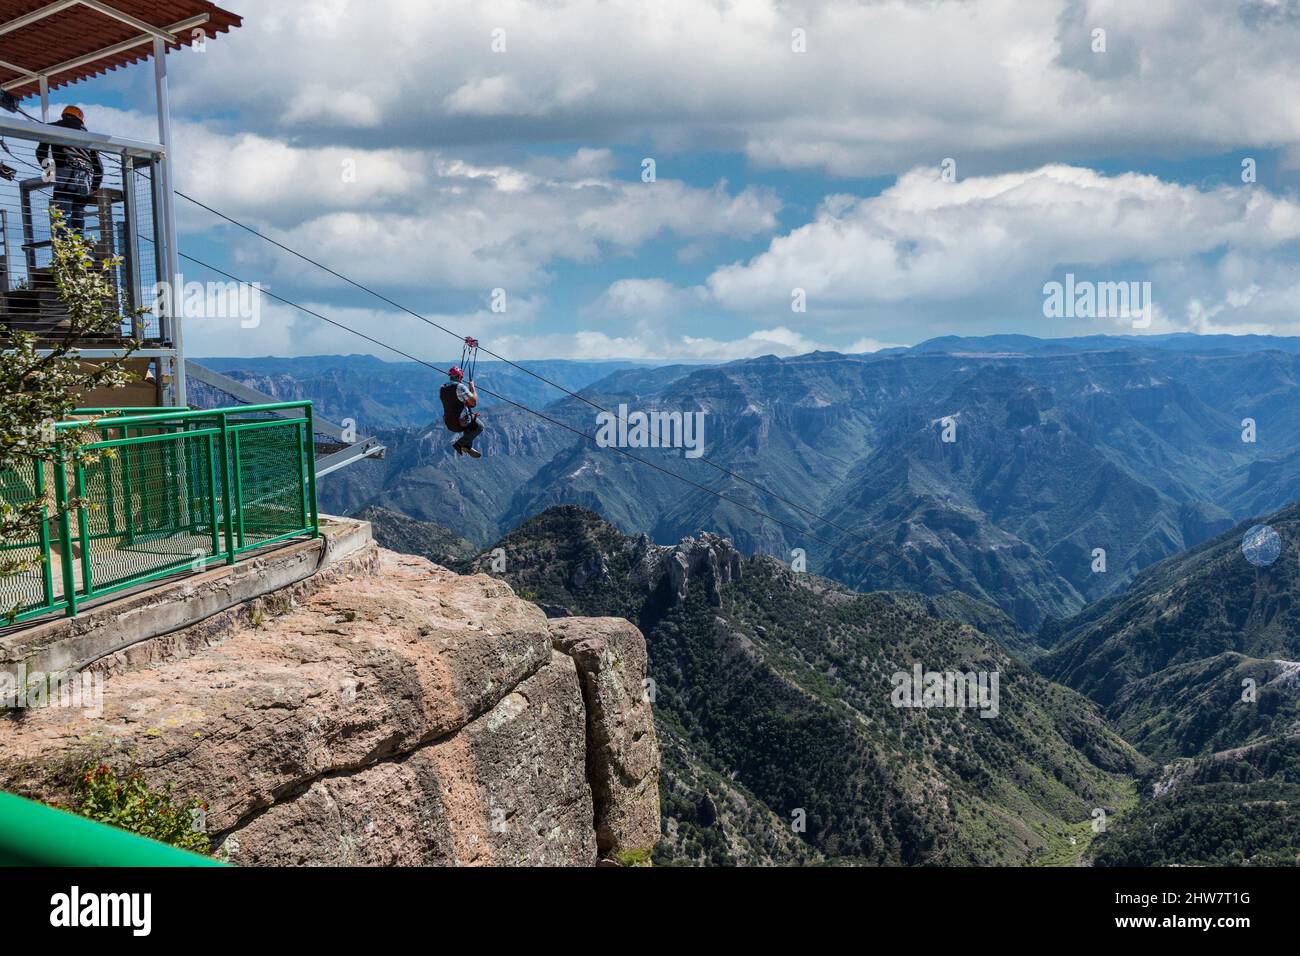 Ziplining at Divisadero, Copper Canyon, Chihuahua, Mexico. 8350 feet long, longest zip line in the world.  Speed may reach 70 mph on the descent. Zip Stock Photo